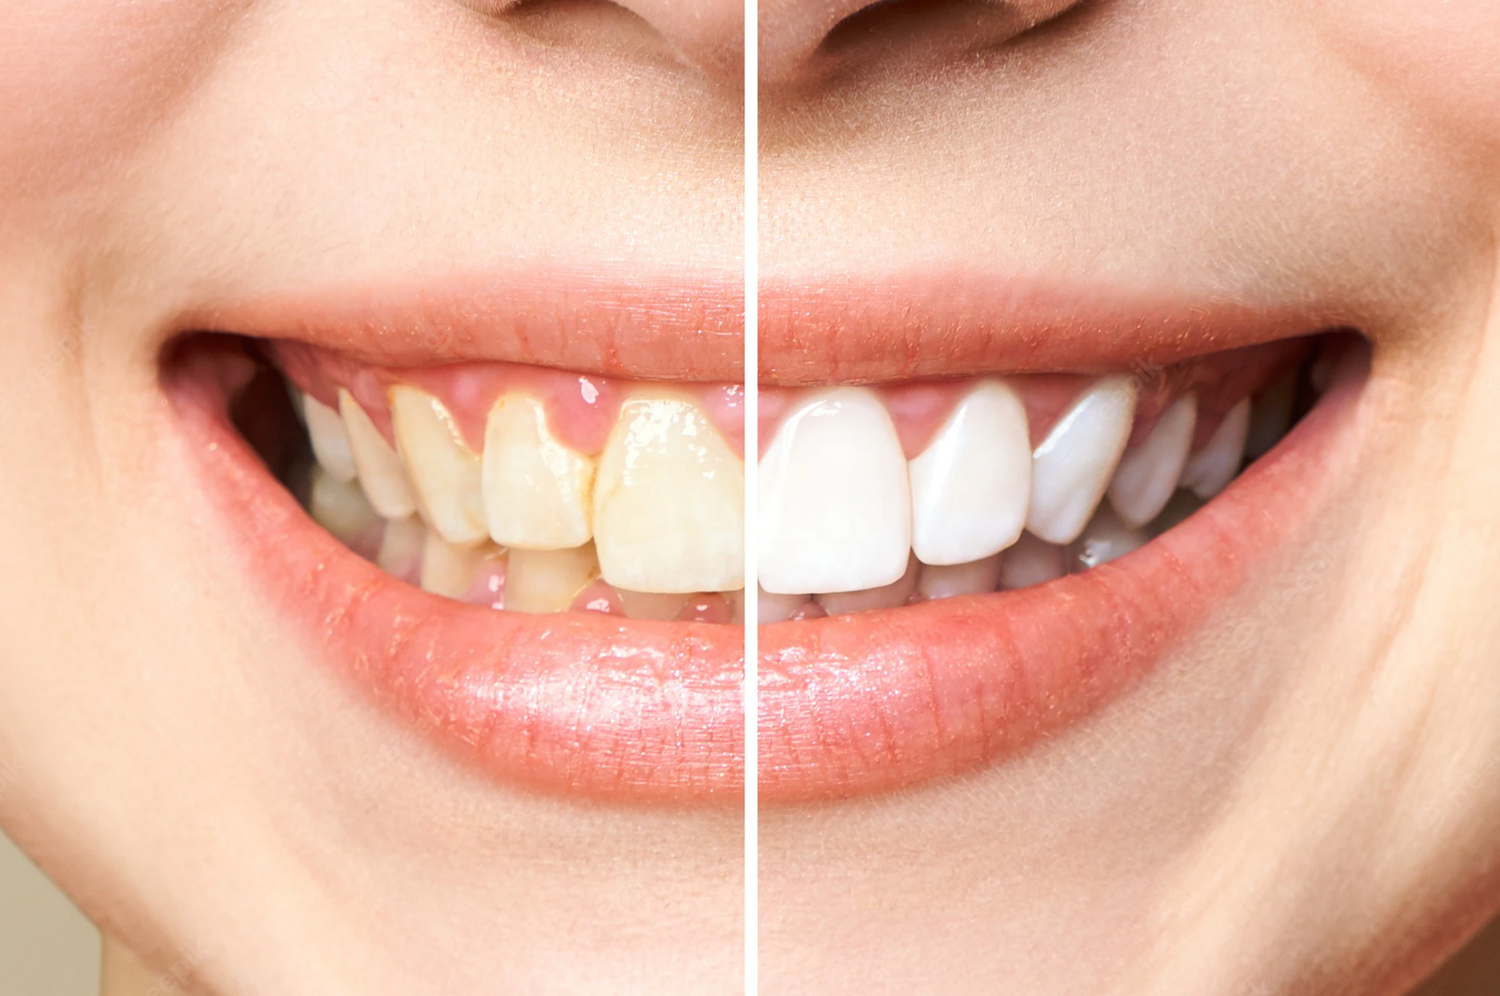 Before and After Using Da Vinci Teeth Whitening